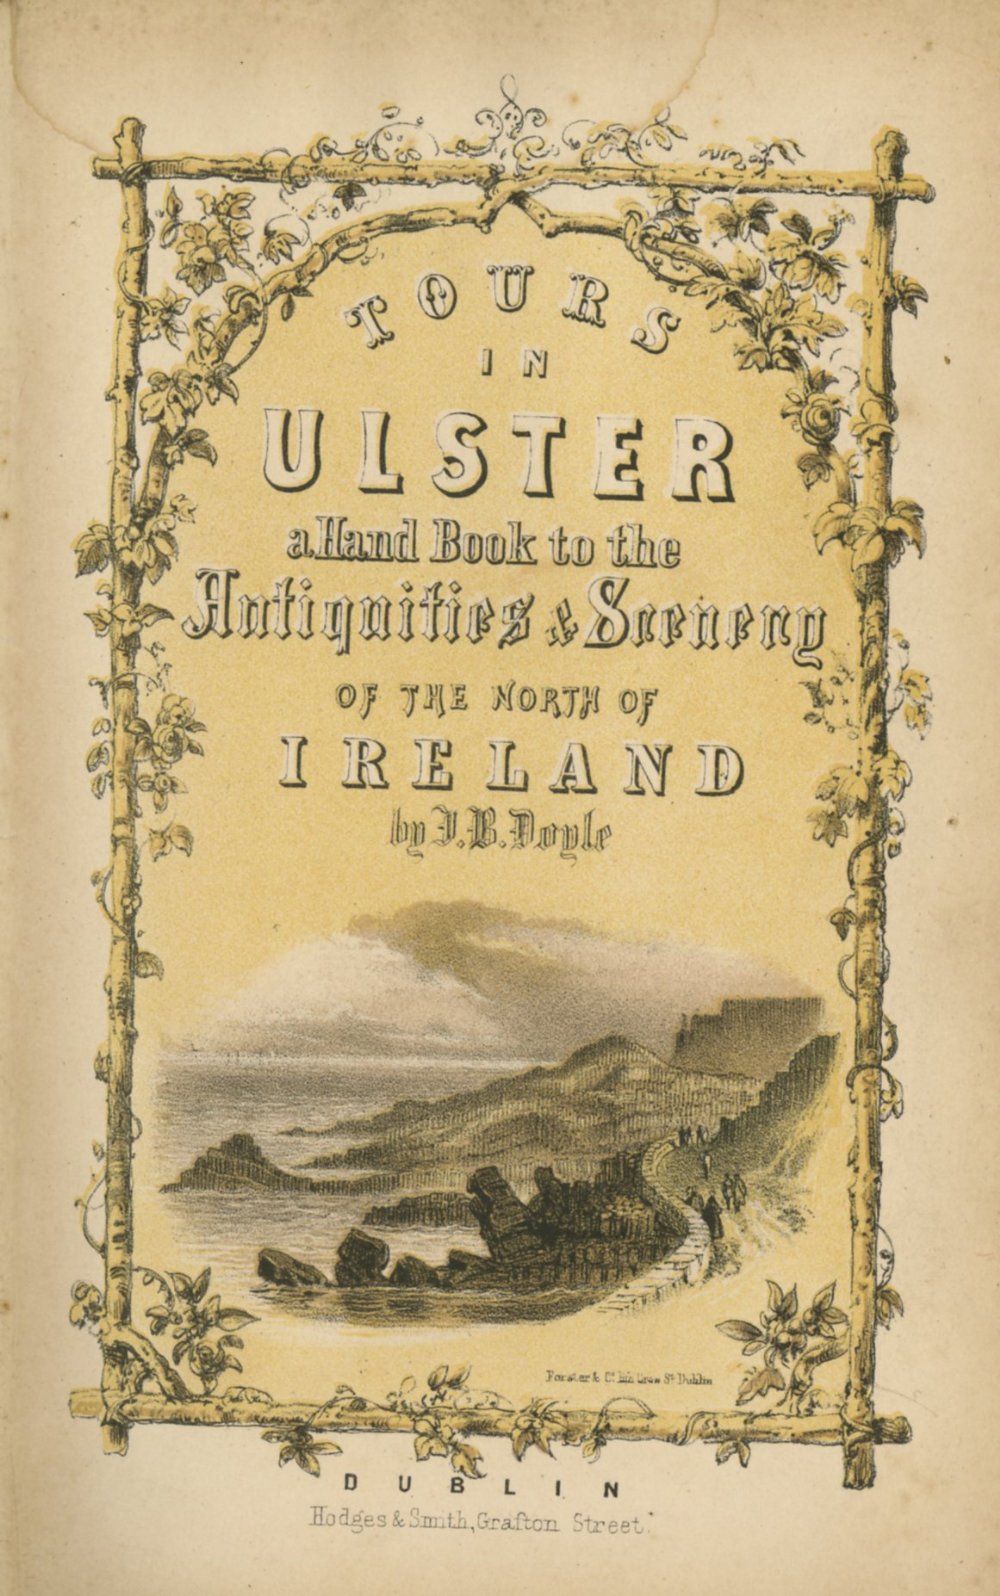 Northern Ireland: Doyle (J.B.) Tours in Ulster: A Handbook of The Antiquities and Scenery... sm.